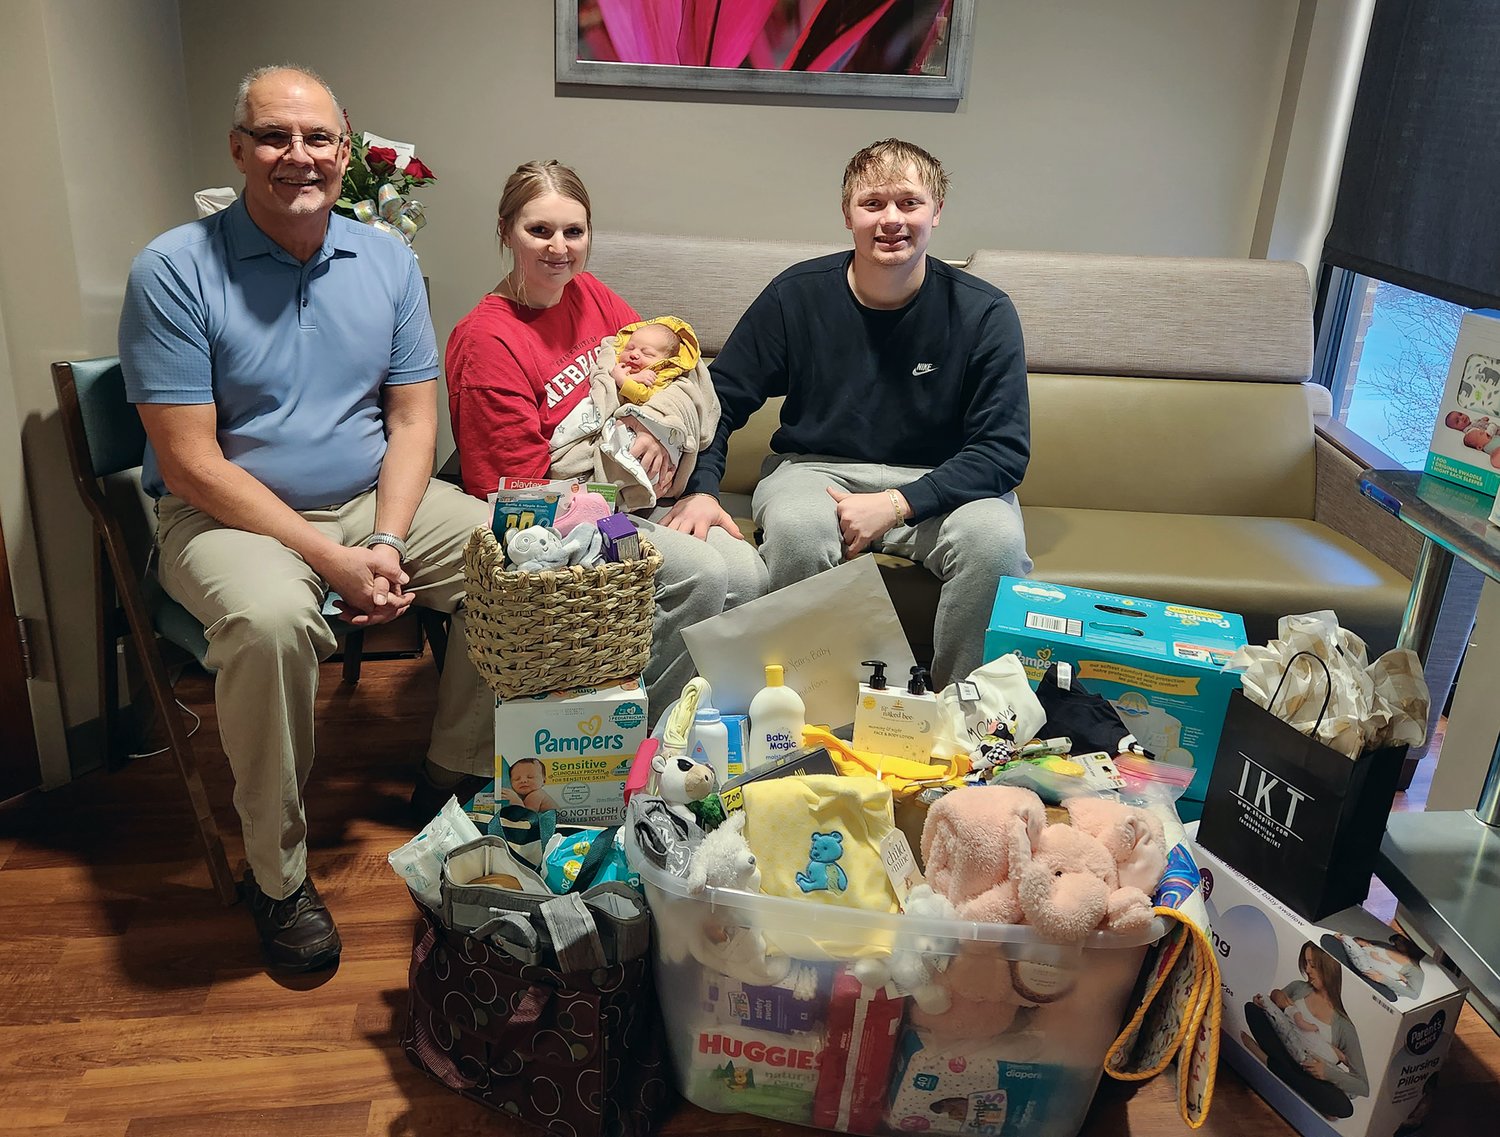 Dr. Benjamin Martin (left) poses with the PMC's New Year's Baby Finn Andrew Stoll and his parents. Also pictured are the items he received for being the first baby born at PMC in 2023.